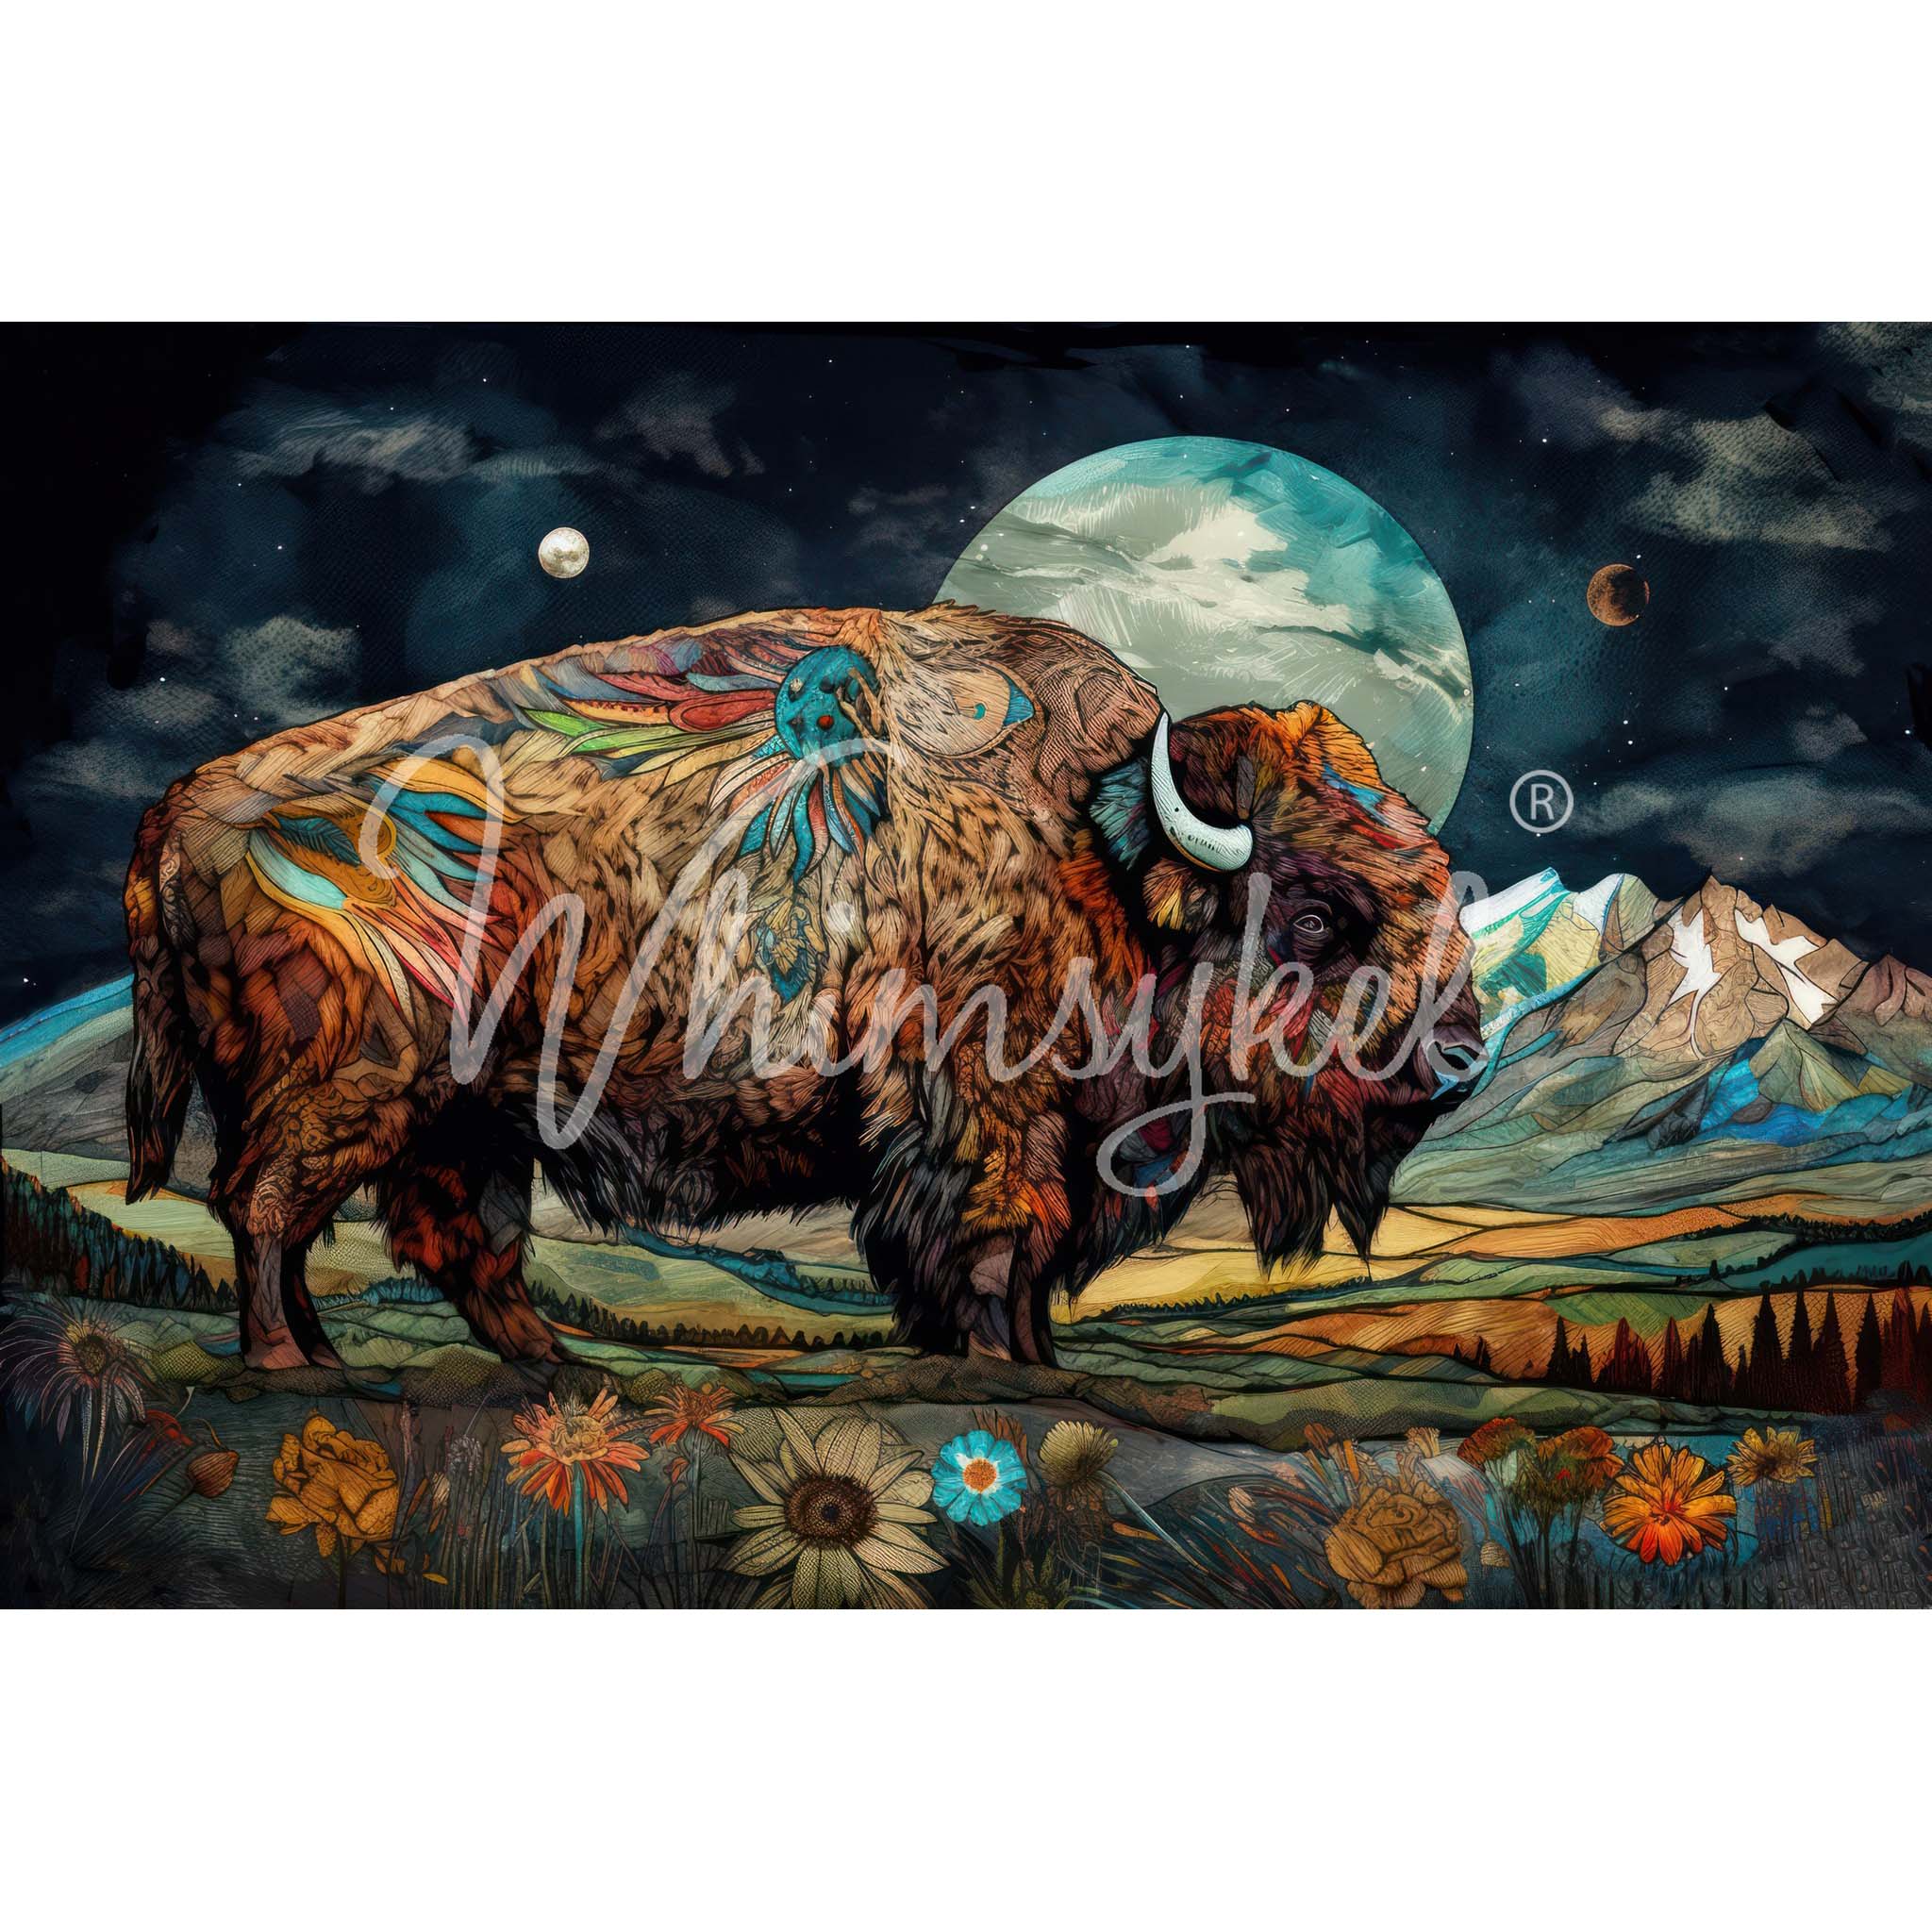 Tissue paper design is a bohemian style tapestry of a buffalo against a mountainous background with a large full moon in a dark sky. White borders are on the top and bottom.